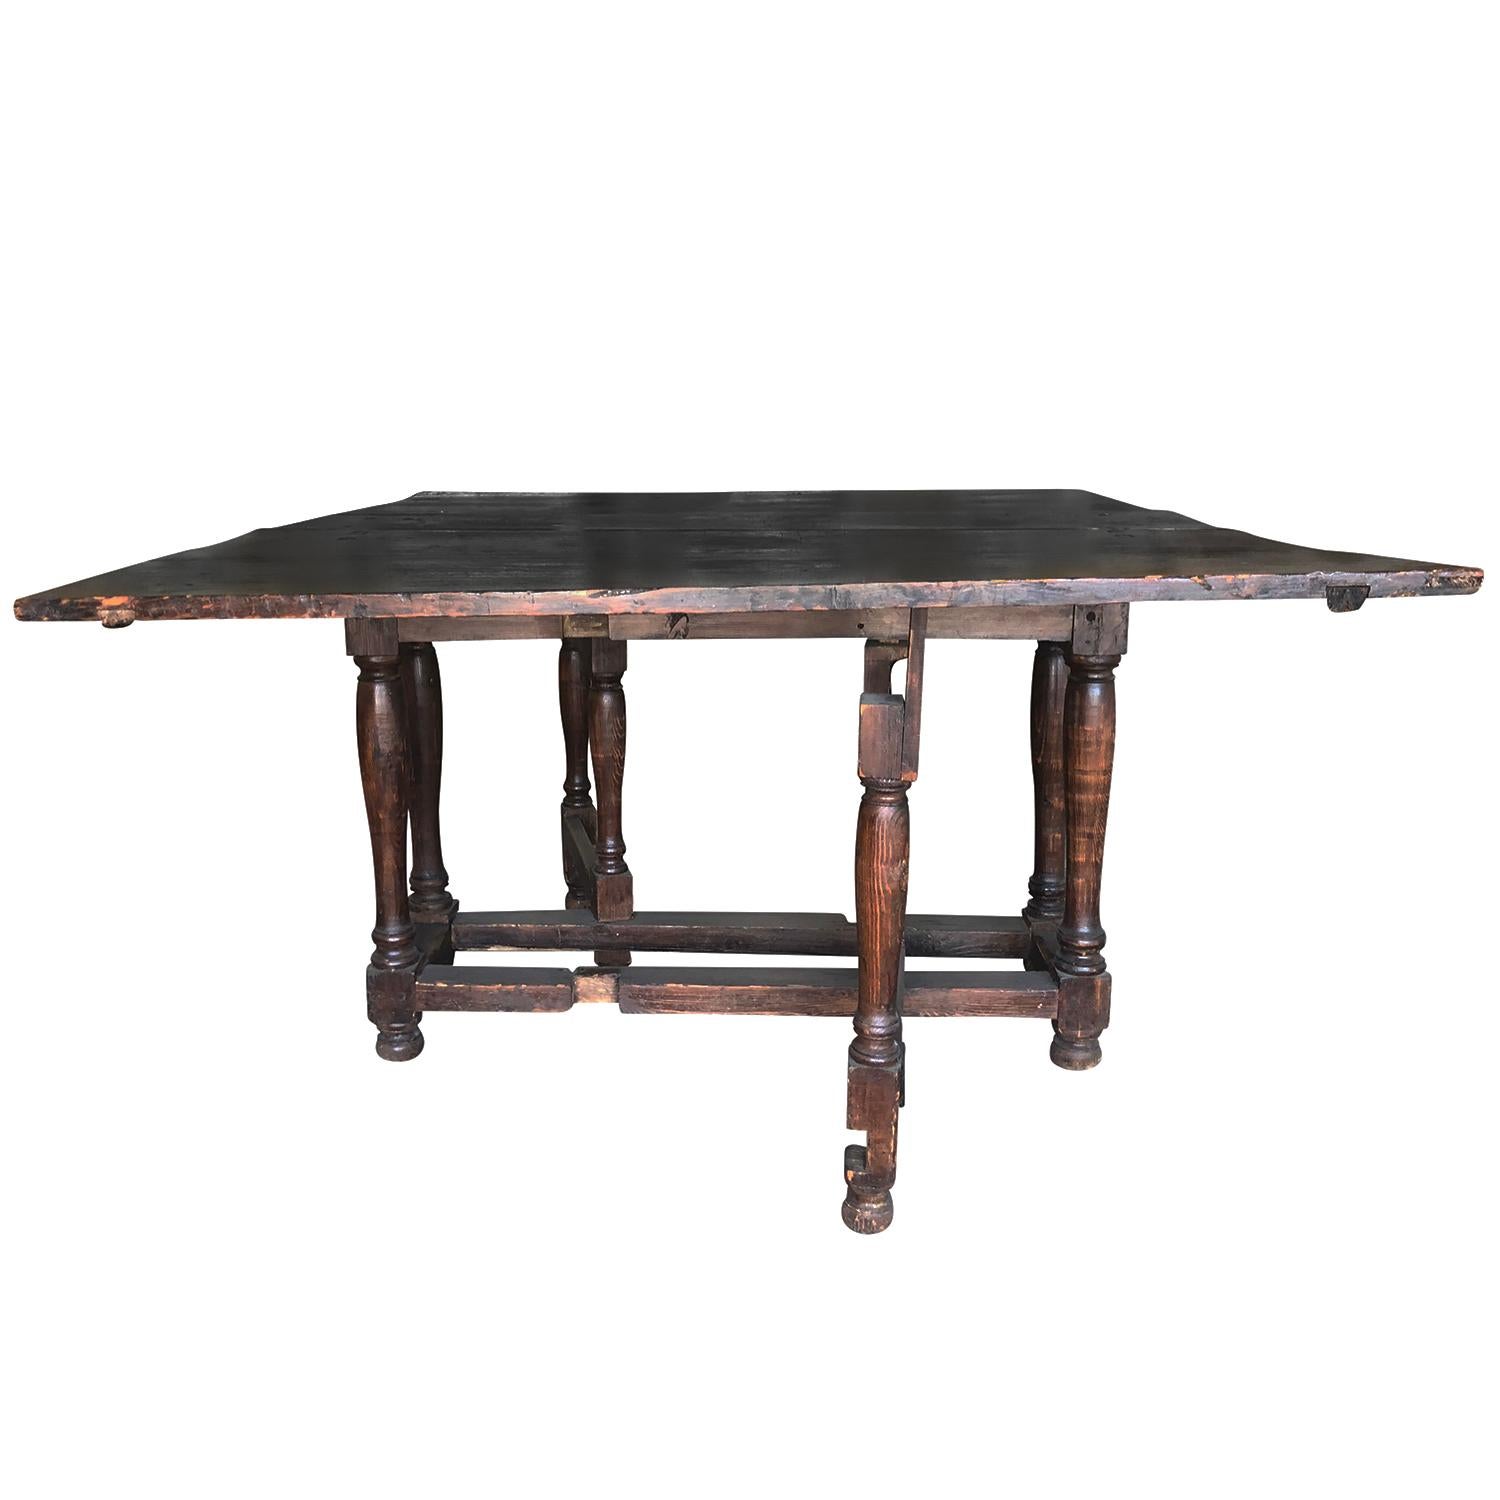 Hand-Carved 18th Century French Rustic Walnut Drop-Leaf Table - Antique Farmhouse Table For Sale